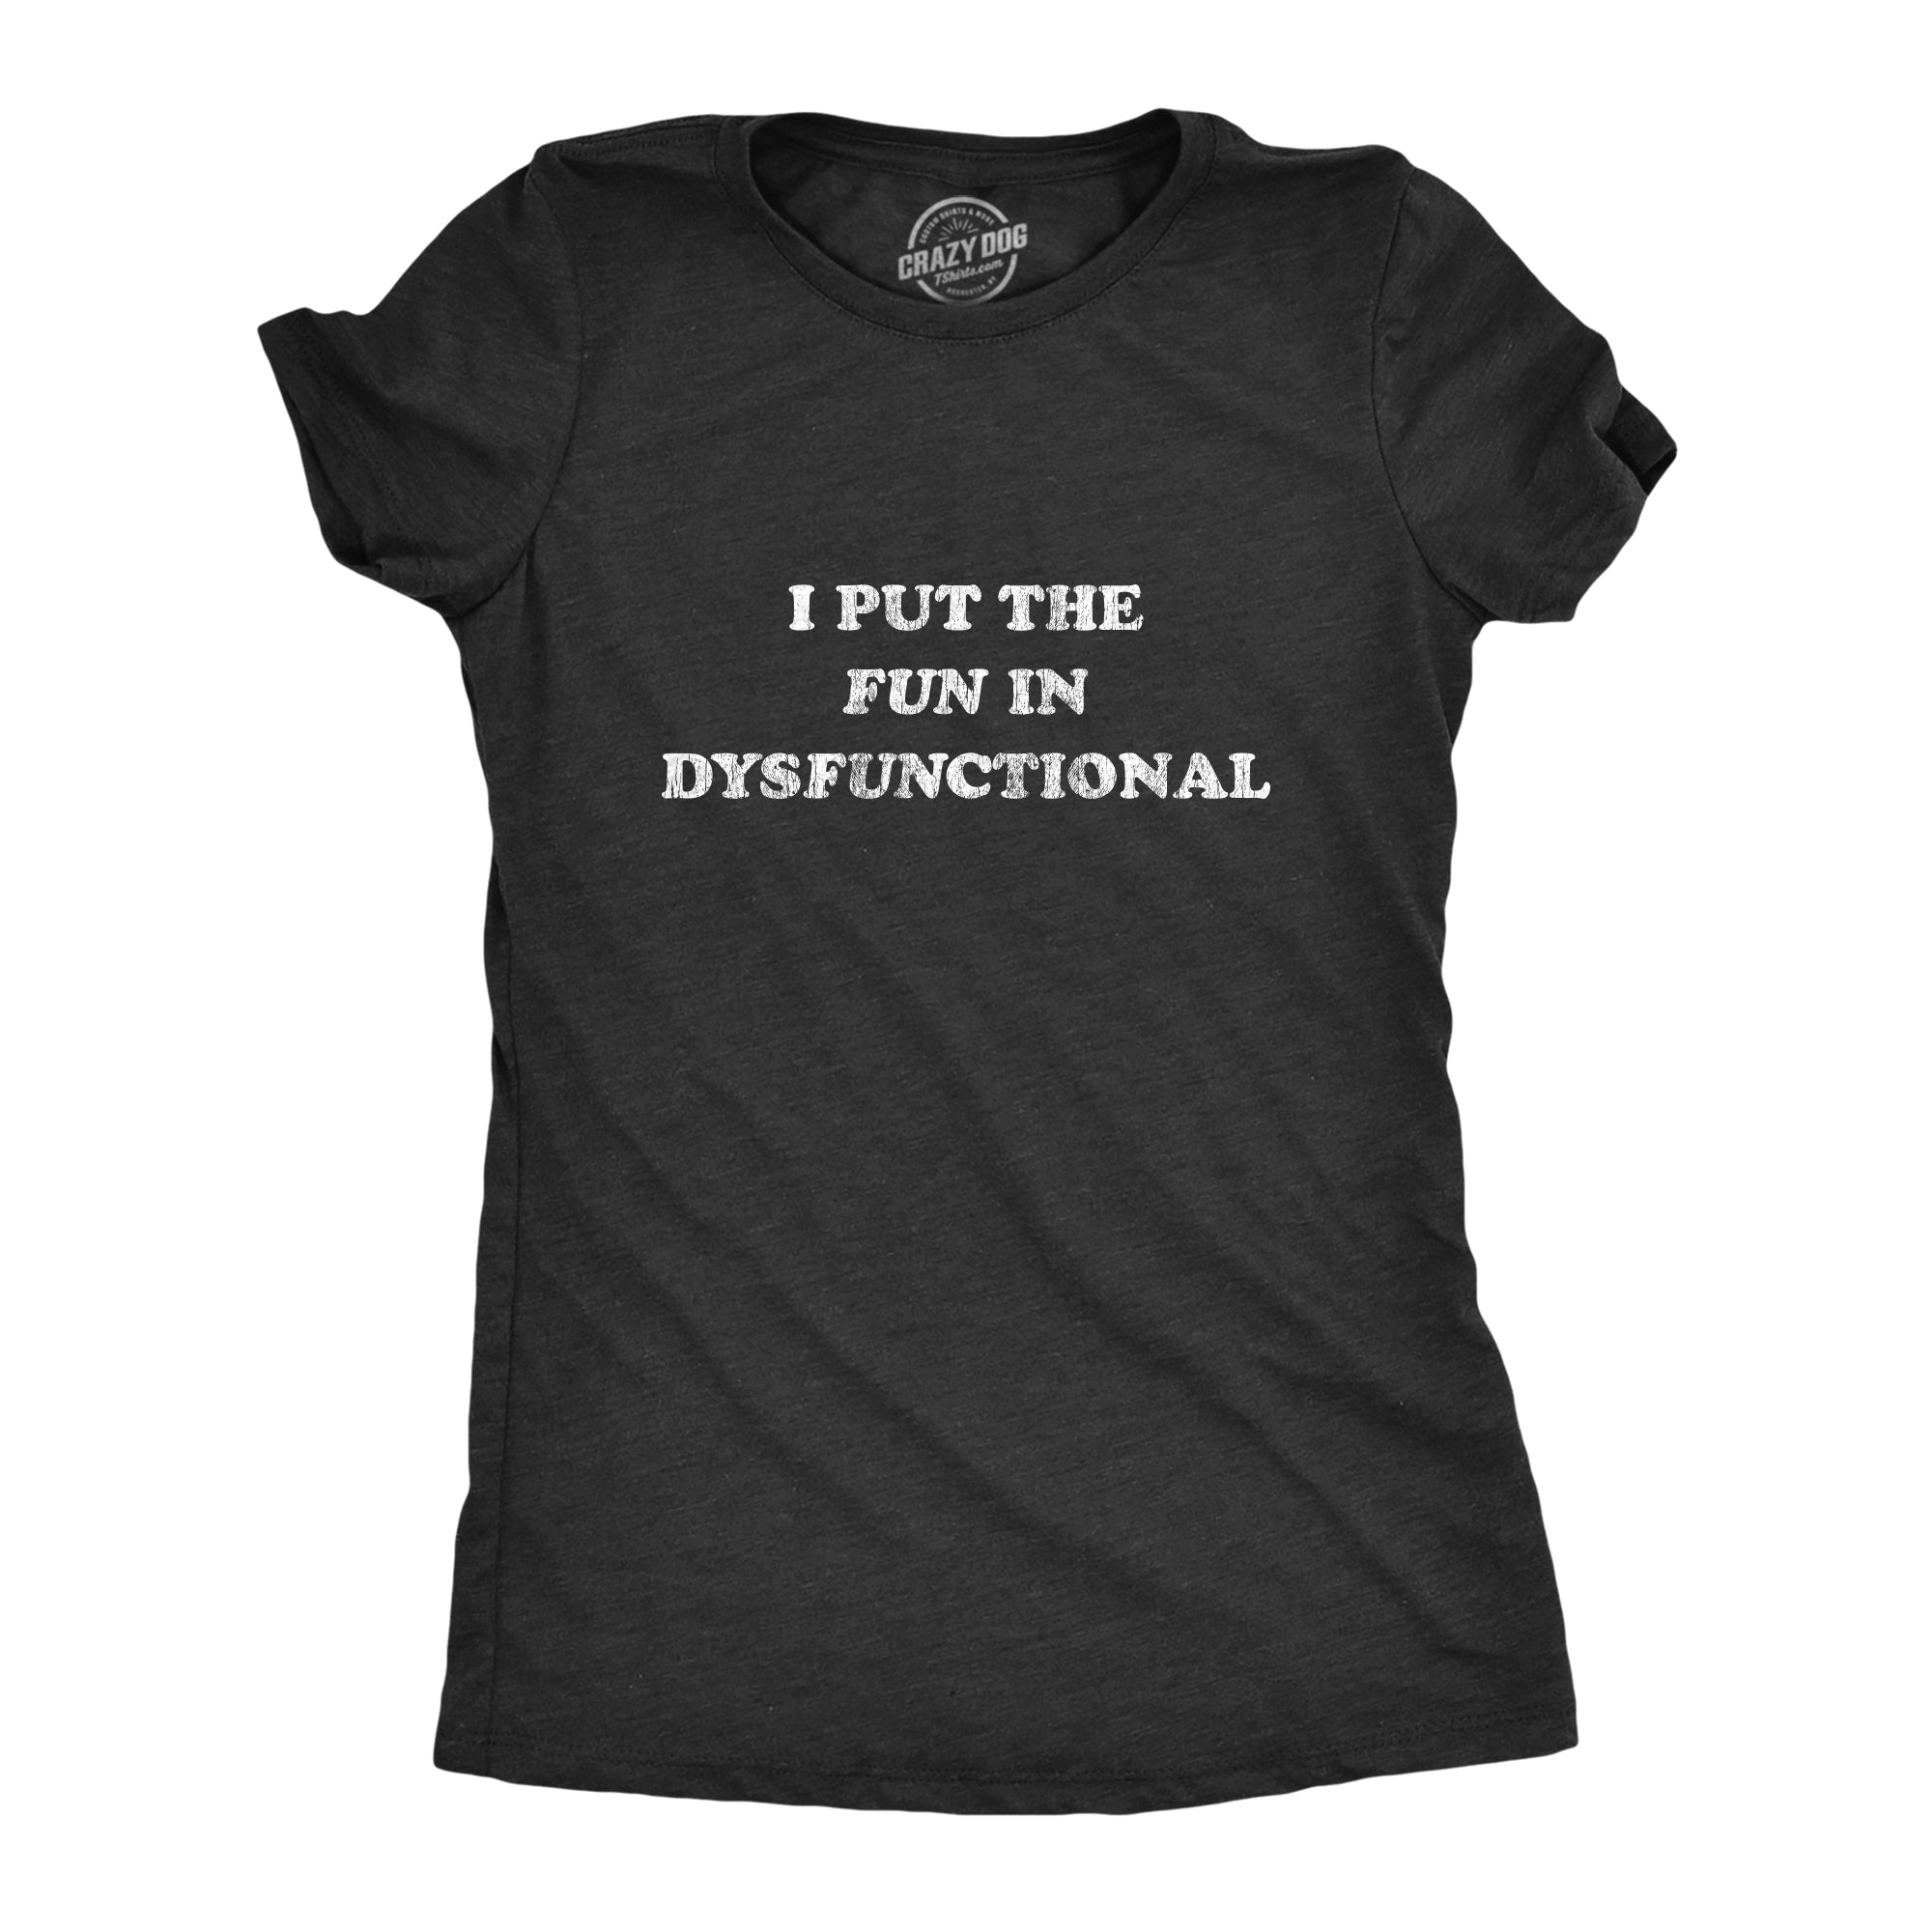 Funny Heather Black I Put The Fun In Dysfunctional Womens T Shirt Nerdy Valentine's Day Sarcastic Tee